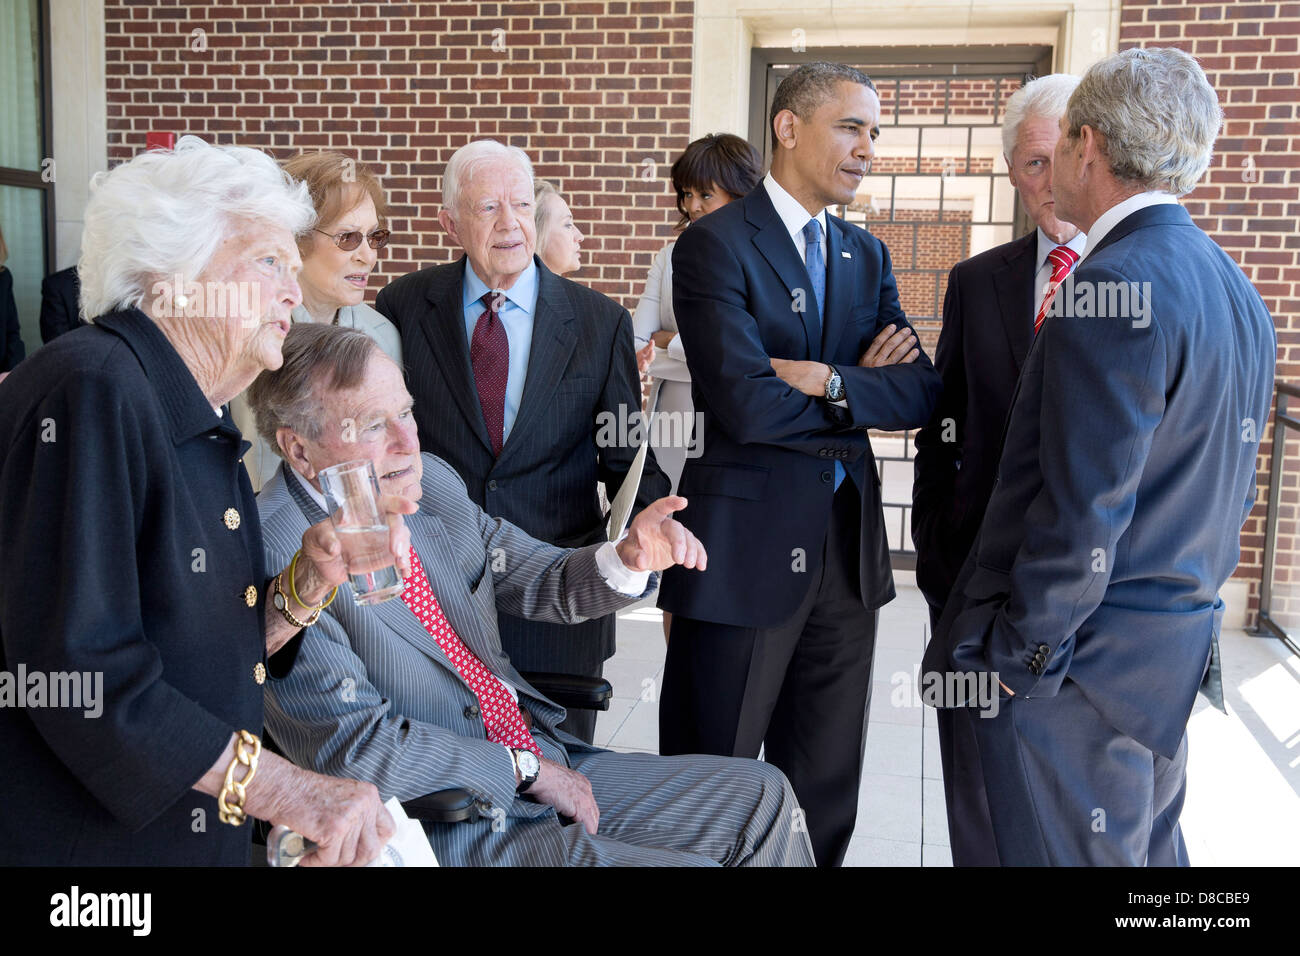 US President Barack Obama and First Lady Michelle Obama talk with former Presidents and First Ladies before a luncheon at the George W. Bush Presidential Library and Museum on the campus of Southern Methodist University April 25, 2013 in Dallas, Texas. Pictured, from left, are: Barbara Bush, George H.W. Bush, Rosalynn Carter, Jimmy Carter, Hillary Rodham Clinton, Bill Clinton, and George W. Bush. Stock Photo